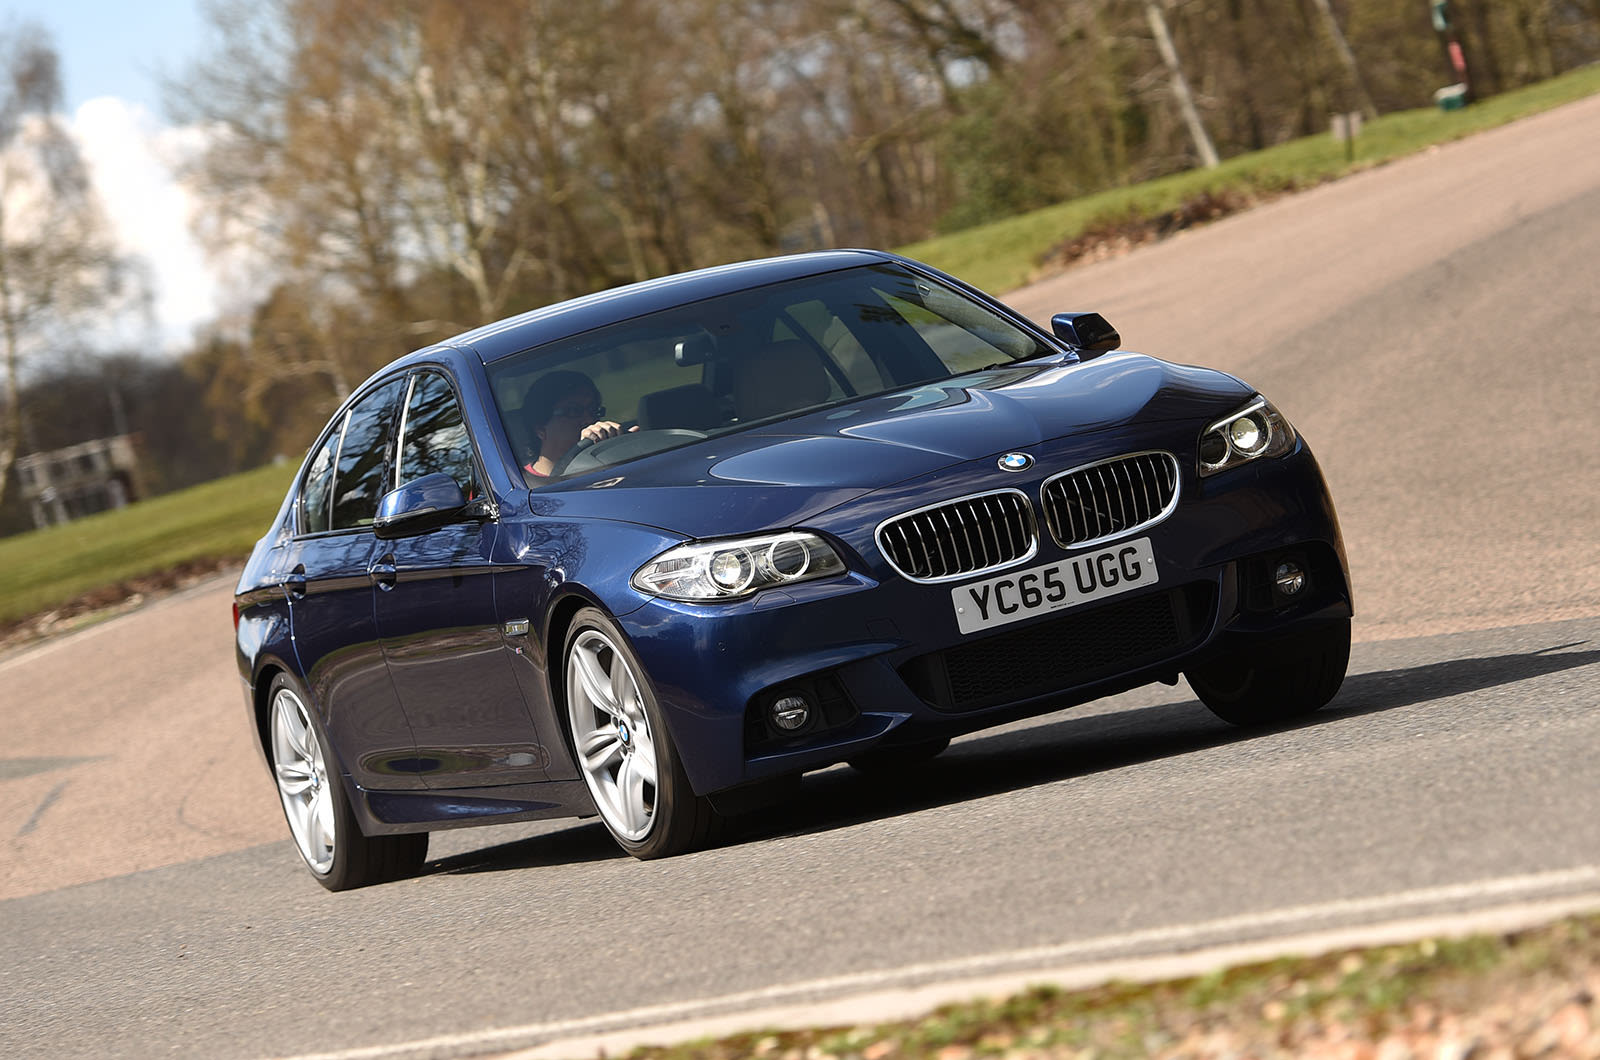 Used BMW 5 Series 2010-2017 review